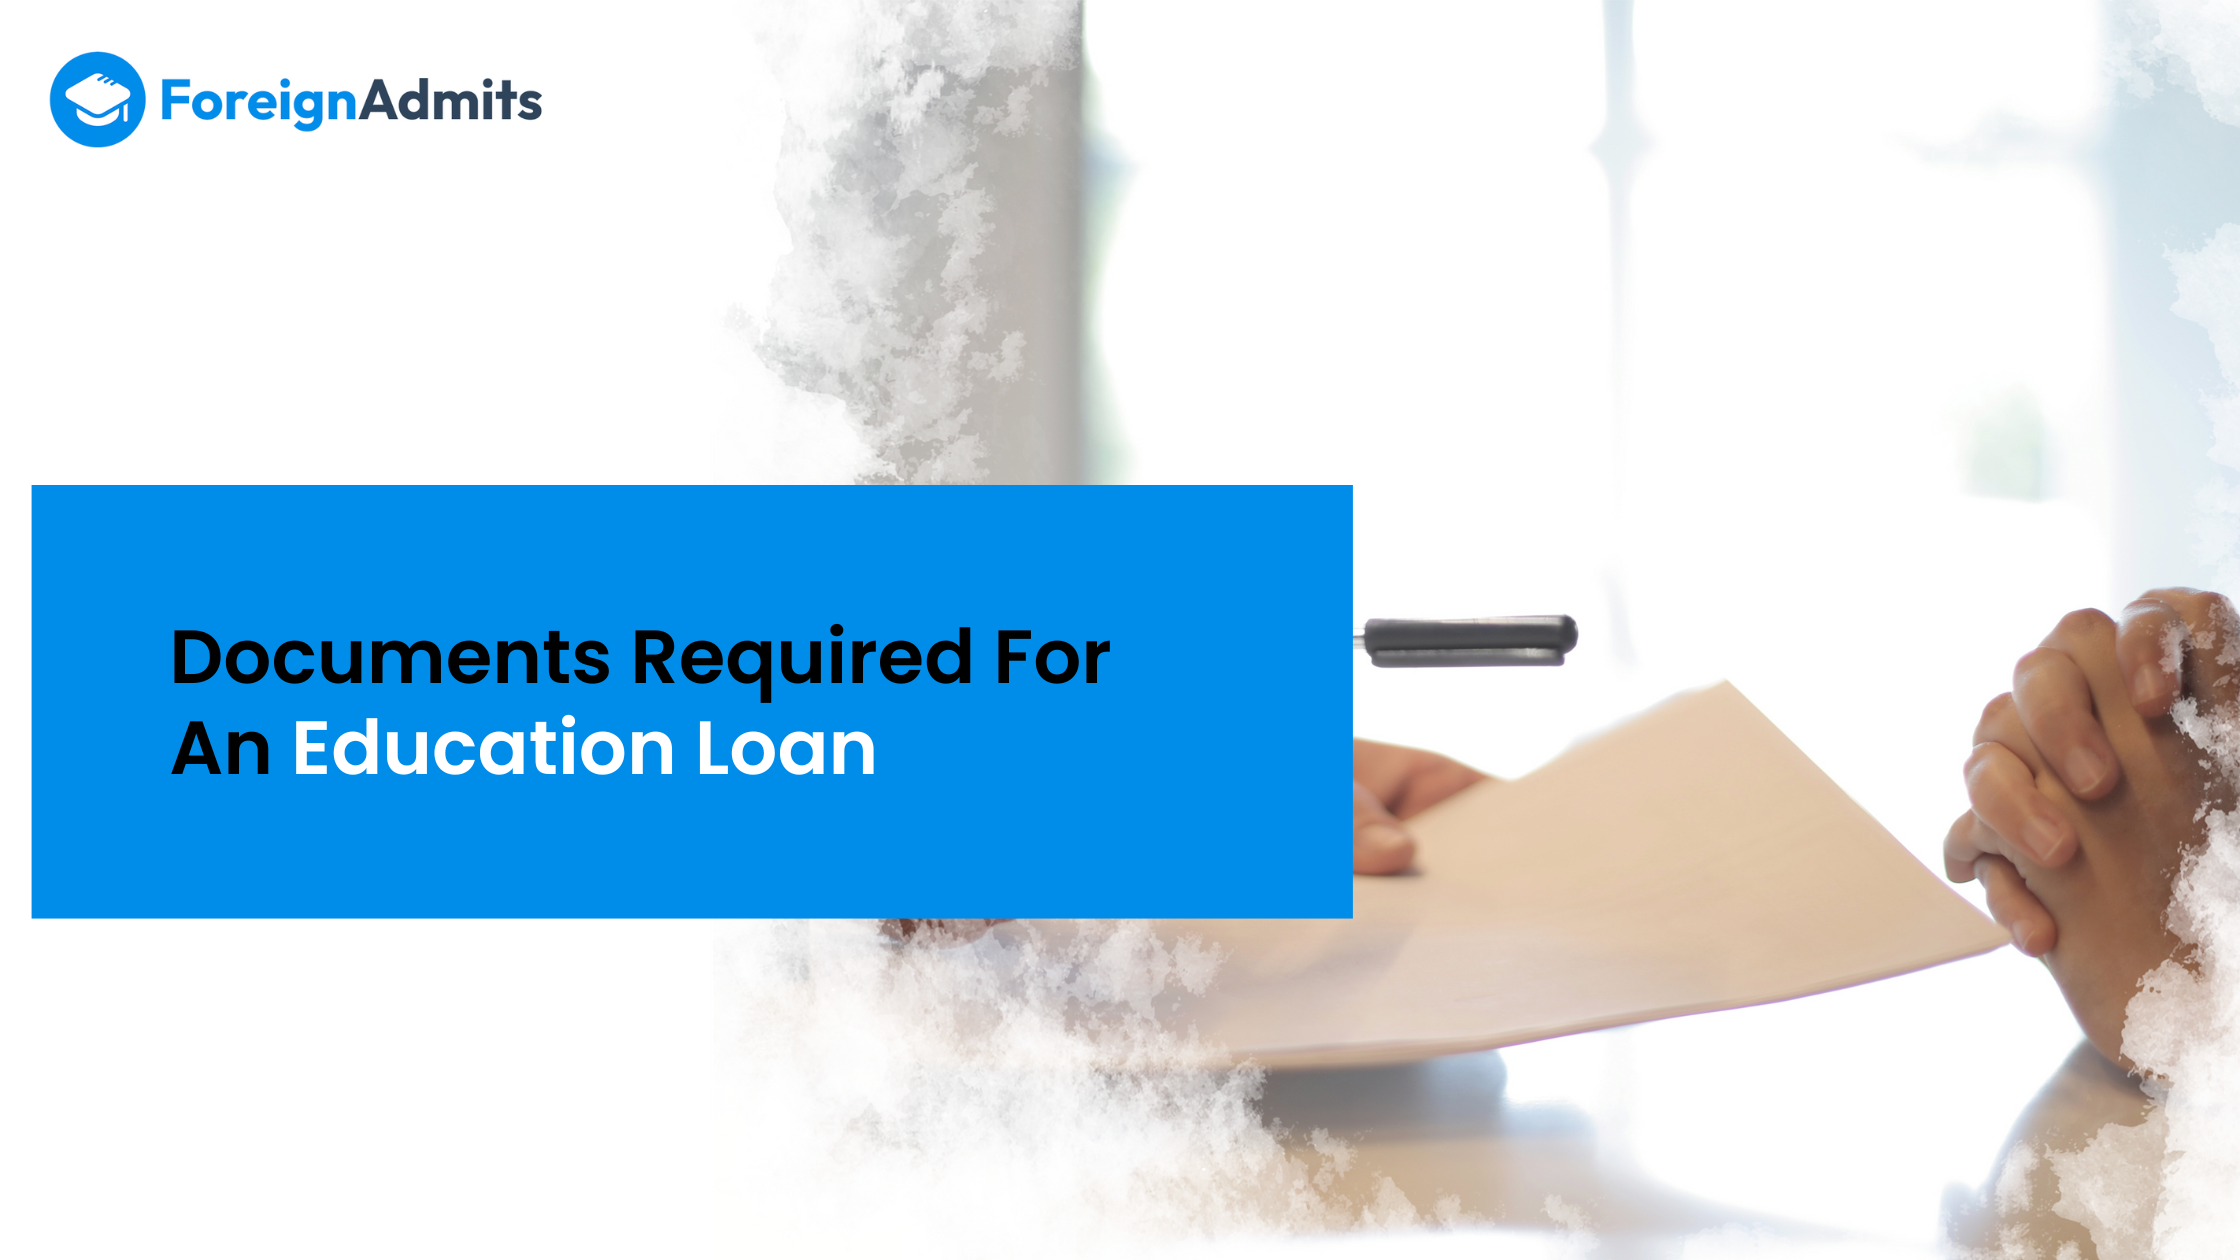 Documents required for an Education Loan